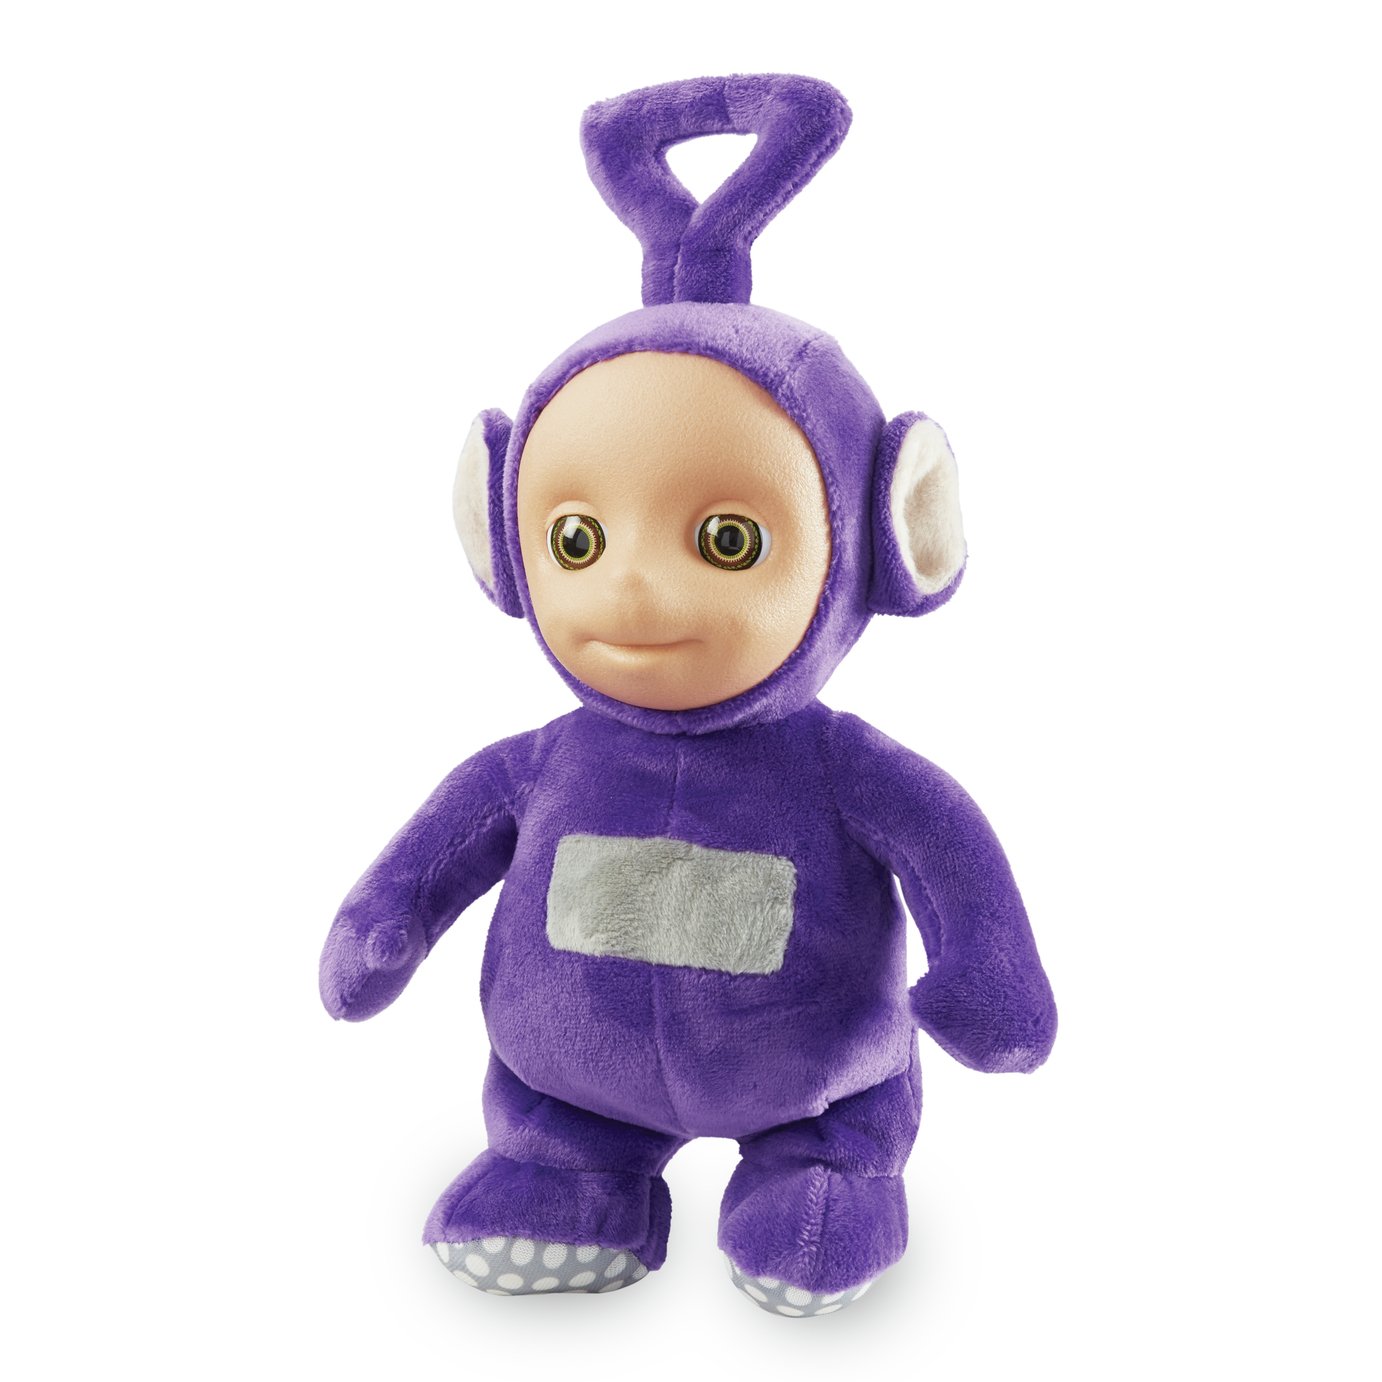 Teletubbies Talking Tinky Winky Soft Toy review